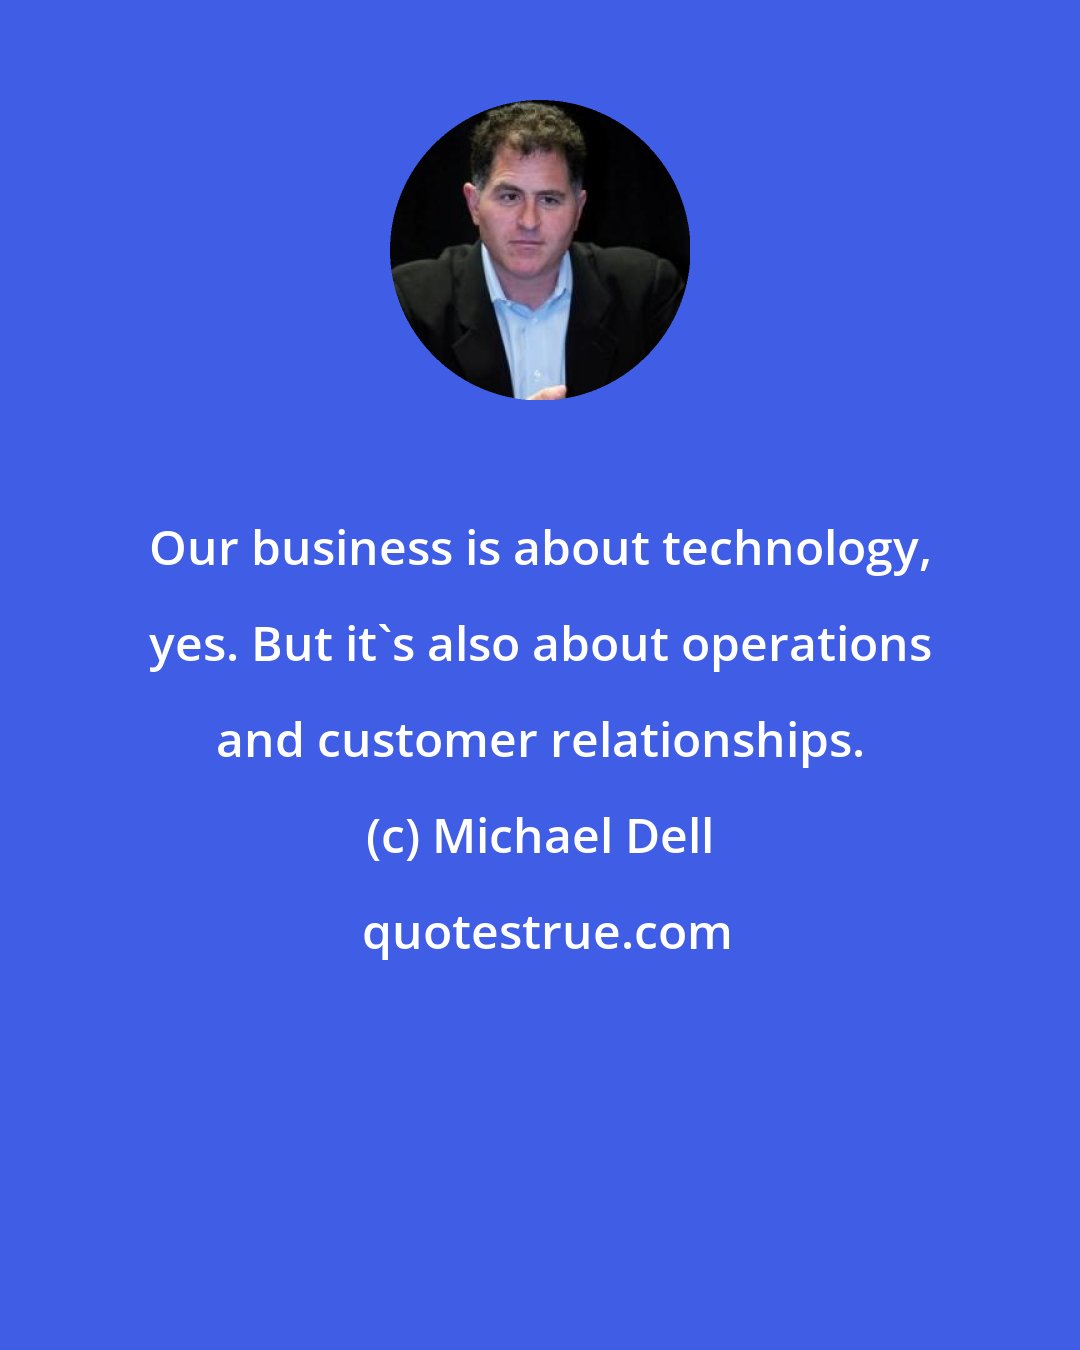 Michael Dell: Our business is about technology, yes. But it's also about operations and customer relationships.